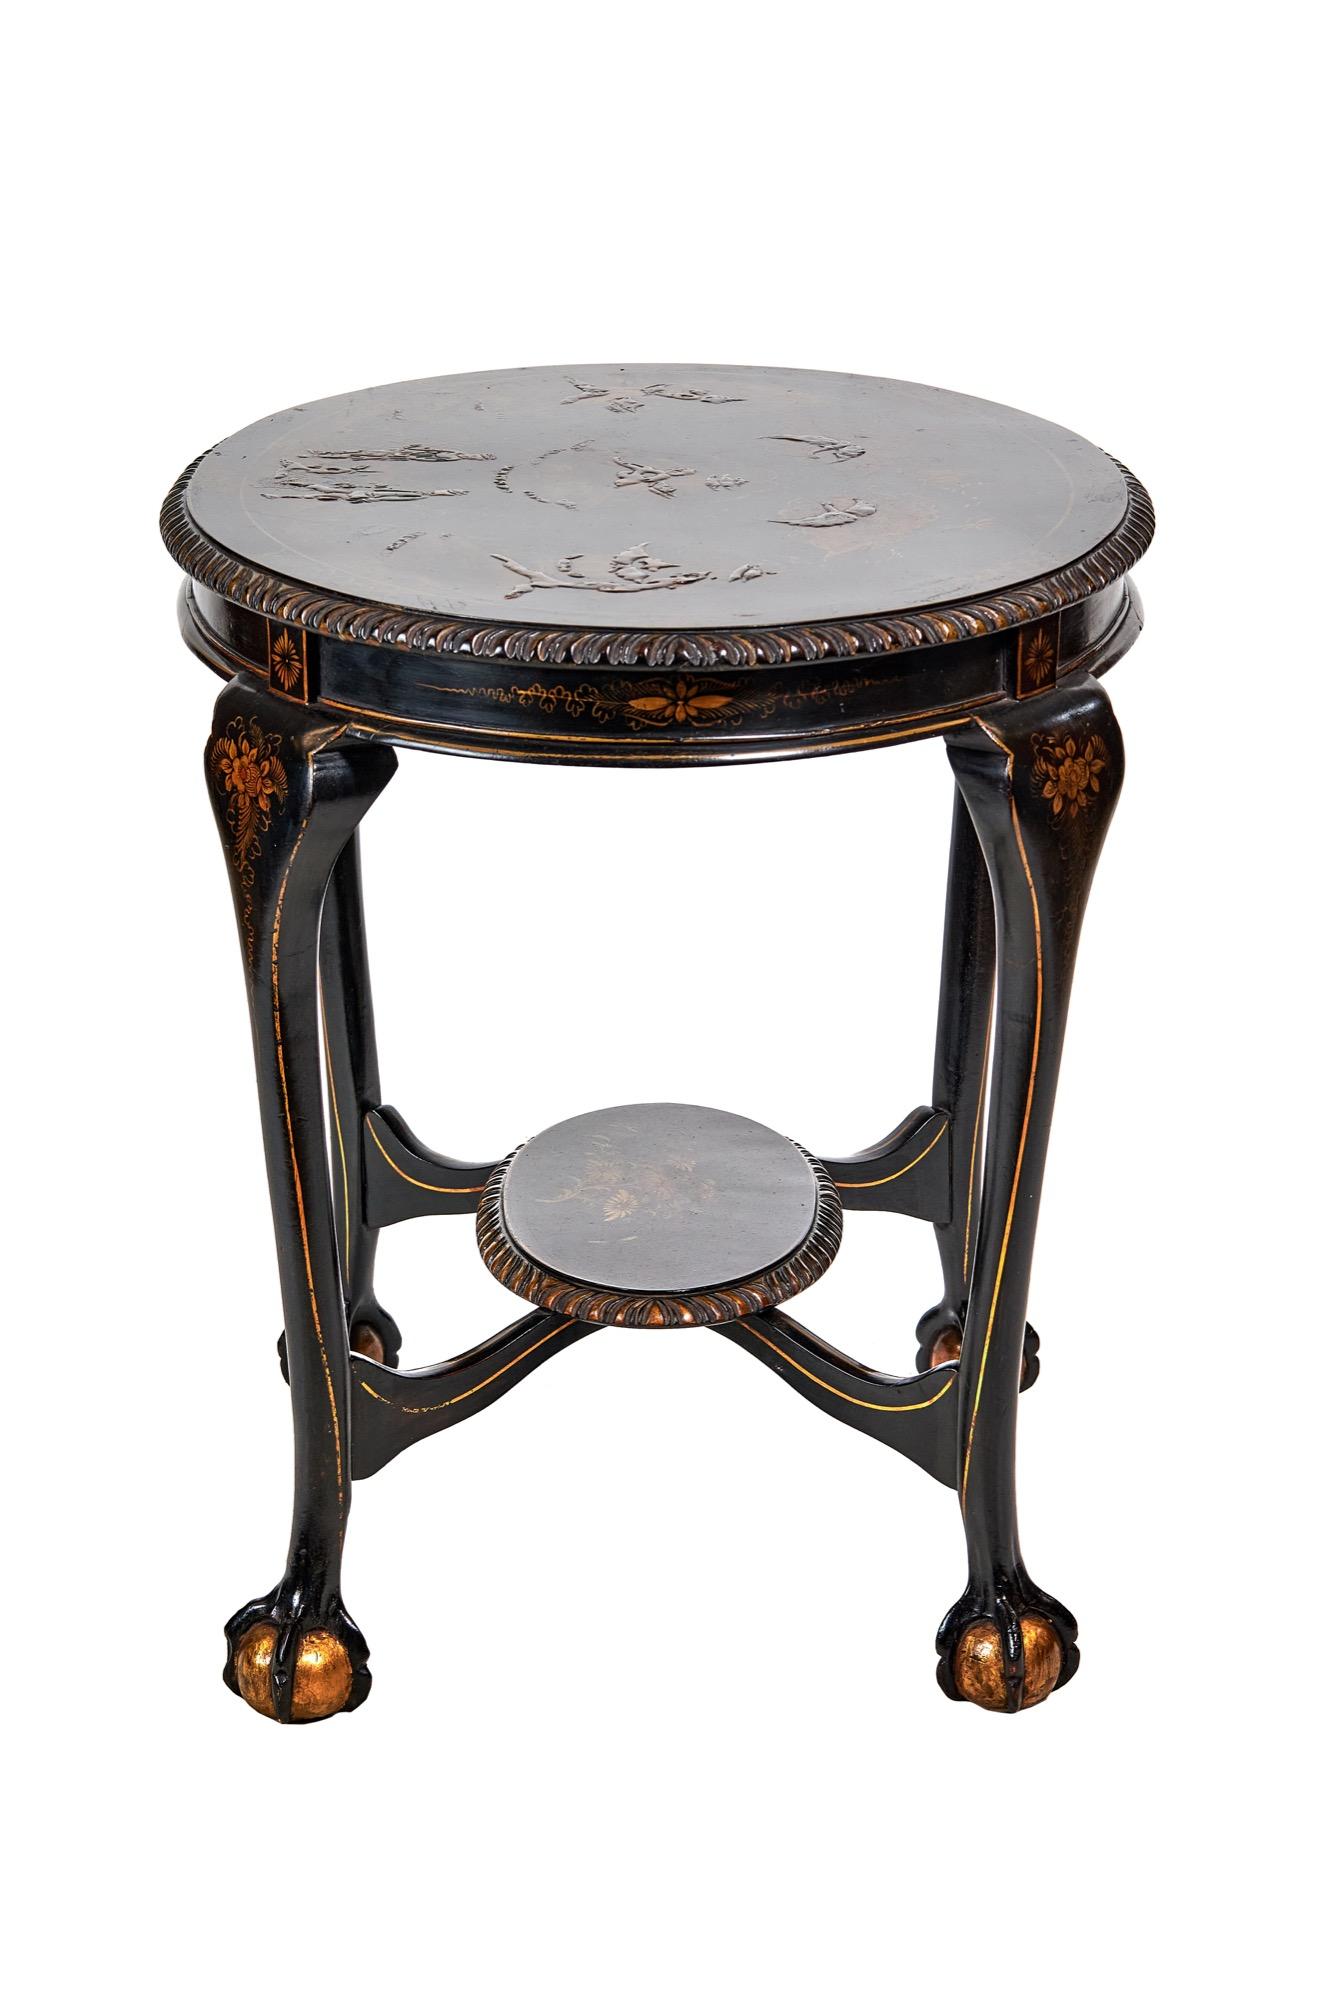 Chinoiserie Decorated Oval 2 tier table circa 1900.
Black & gilt Chinoiserie decoration, 
Top decorated with, figures, Houses, birds & foliage, &
Painted Diamond & gilt line detail, Gadrooned carved edge,
Oval under tier with floral decoration,